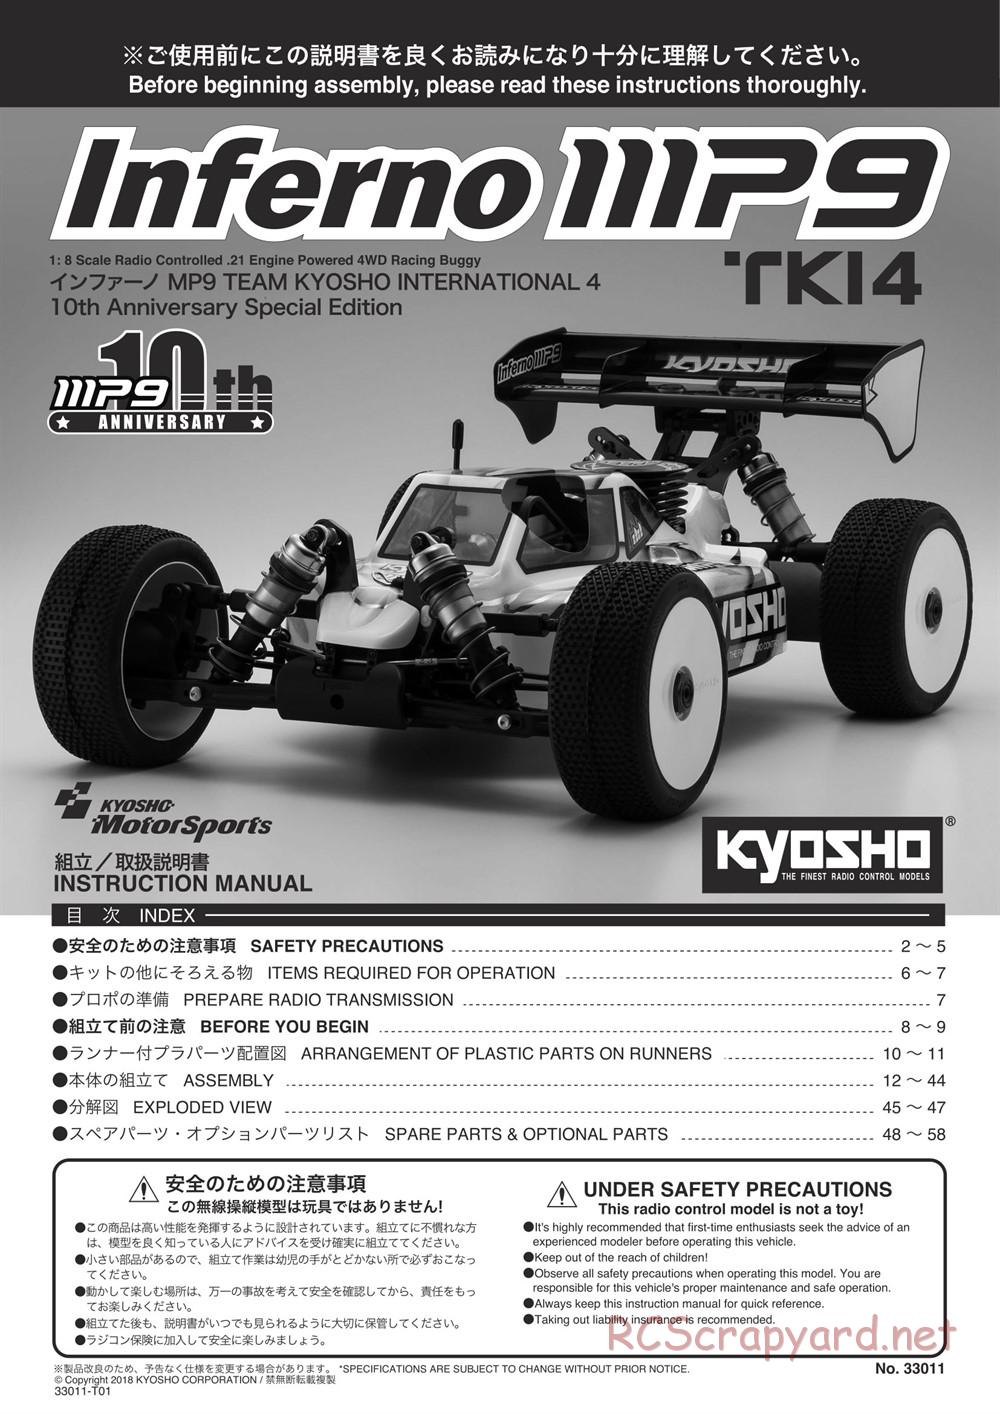 Kyosho - Inferno MP9 TKI4 10th Anniversary Special Edition - Manual - Page 1